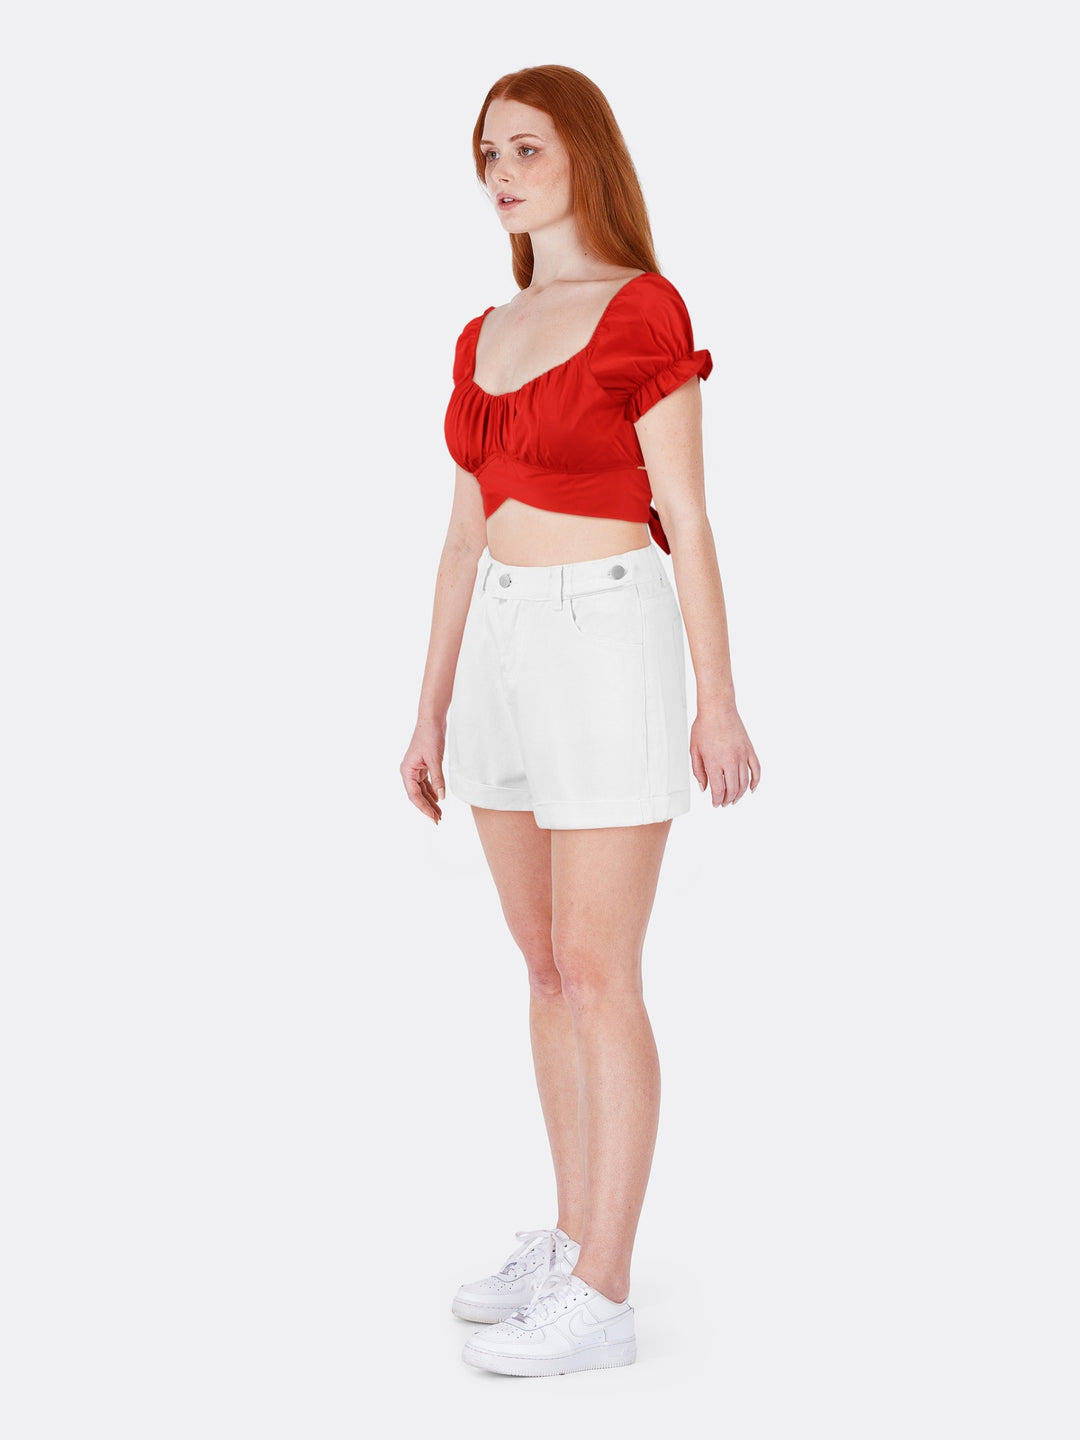 Short Sleeve Crop Top with Backless Tie Red Side